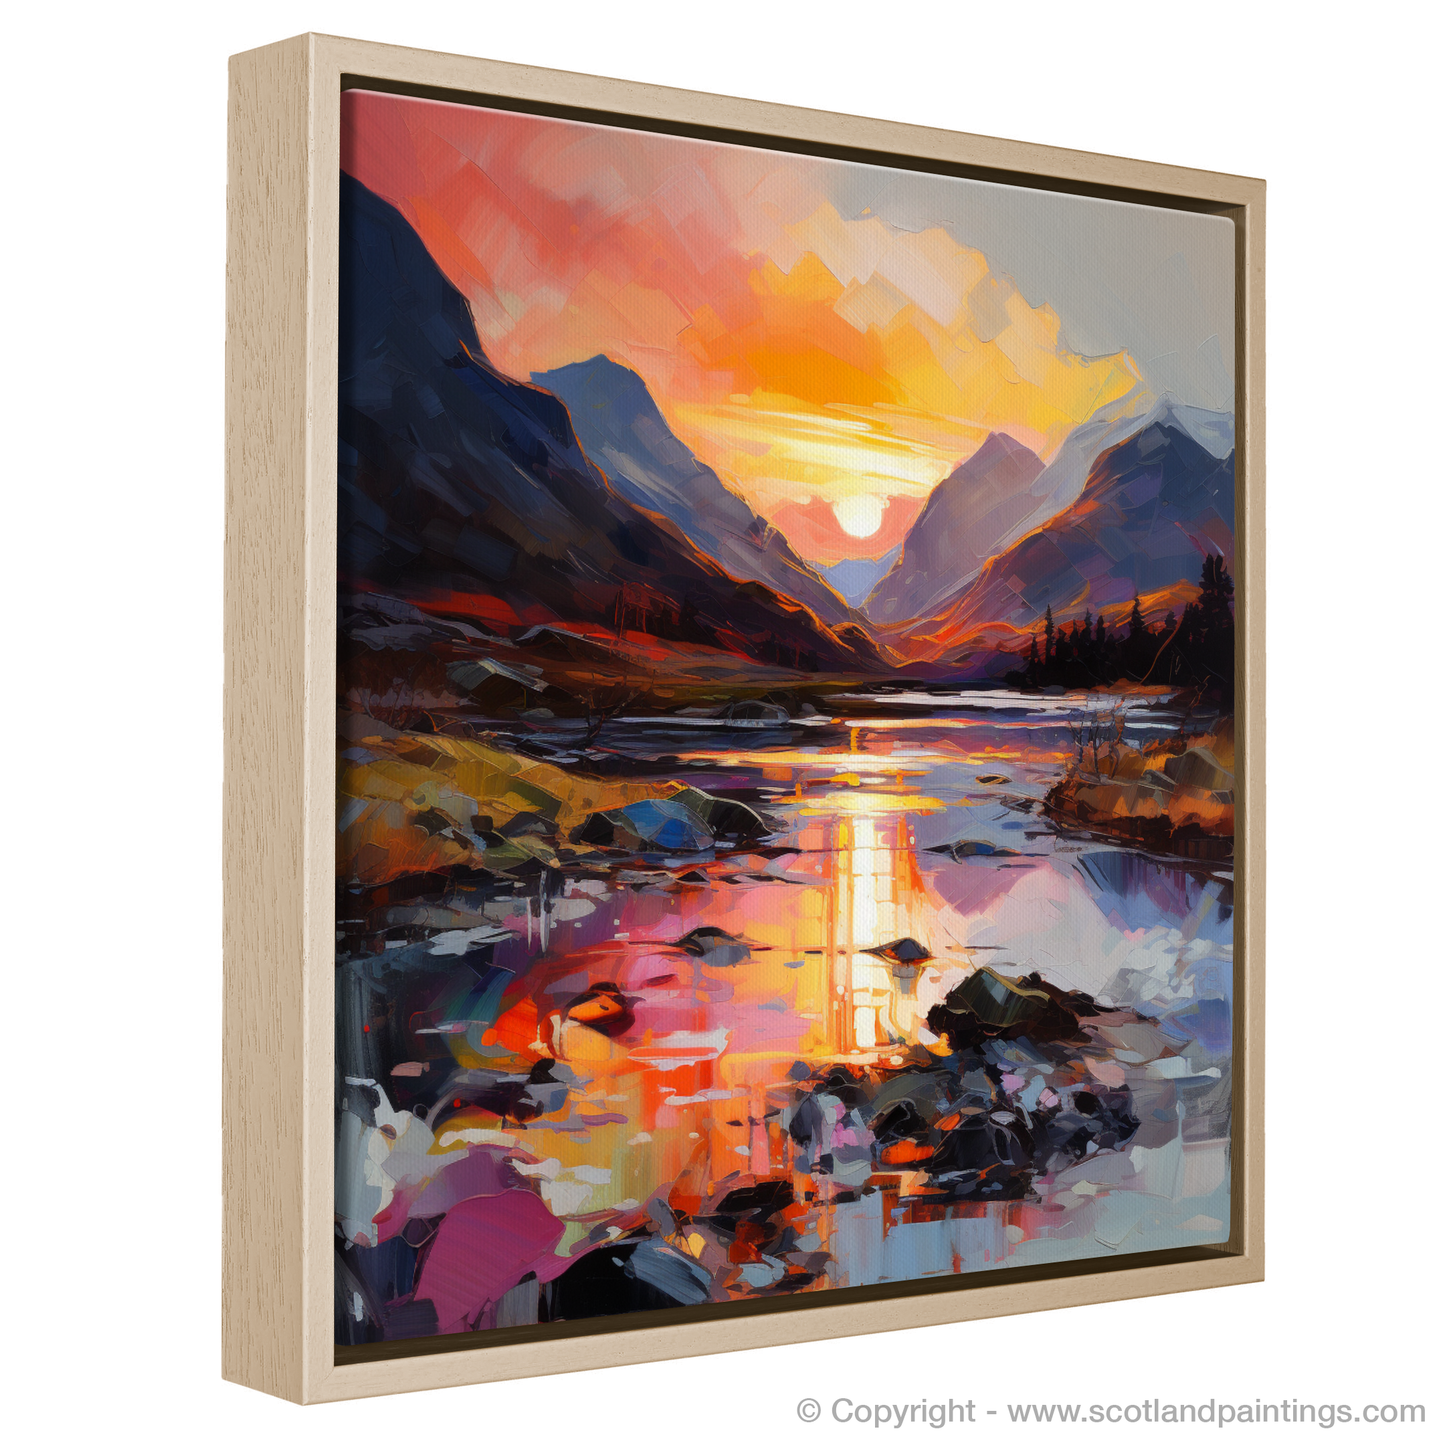 Painting and Art Print of Sunset glow in Glencoe entitled "Fiery Sunset Embrace in Glencoe".